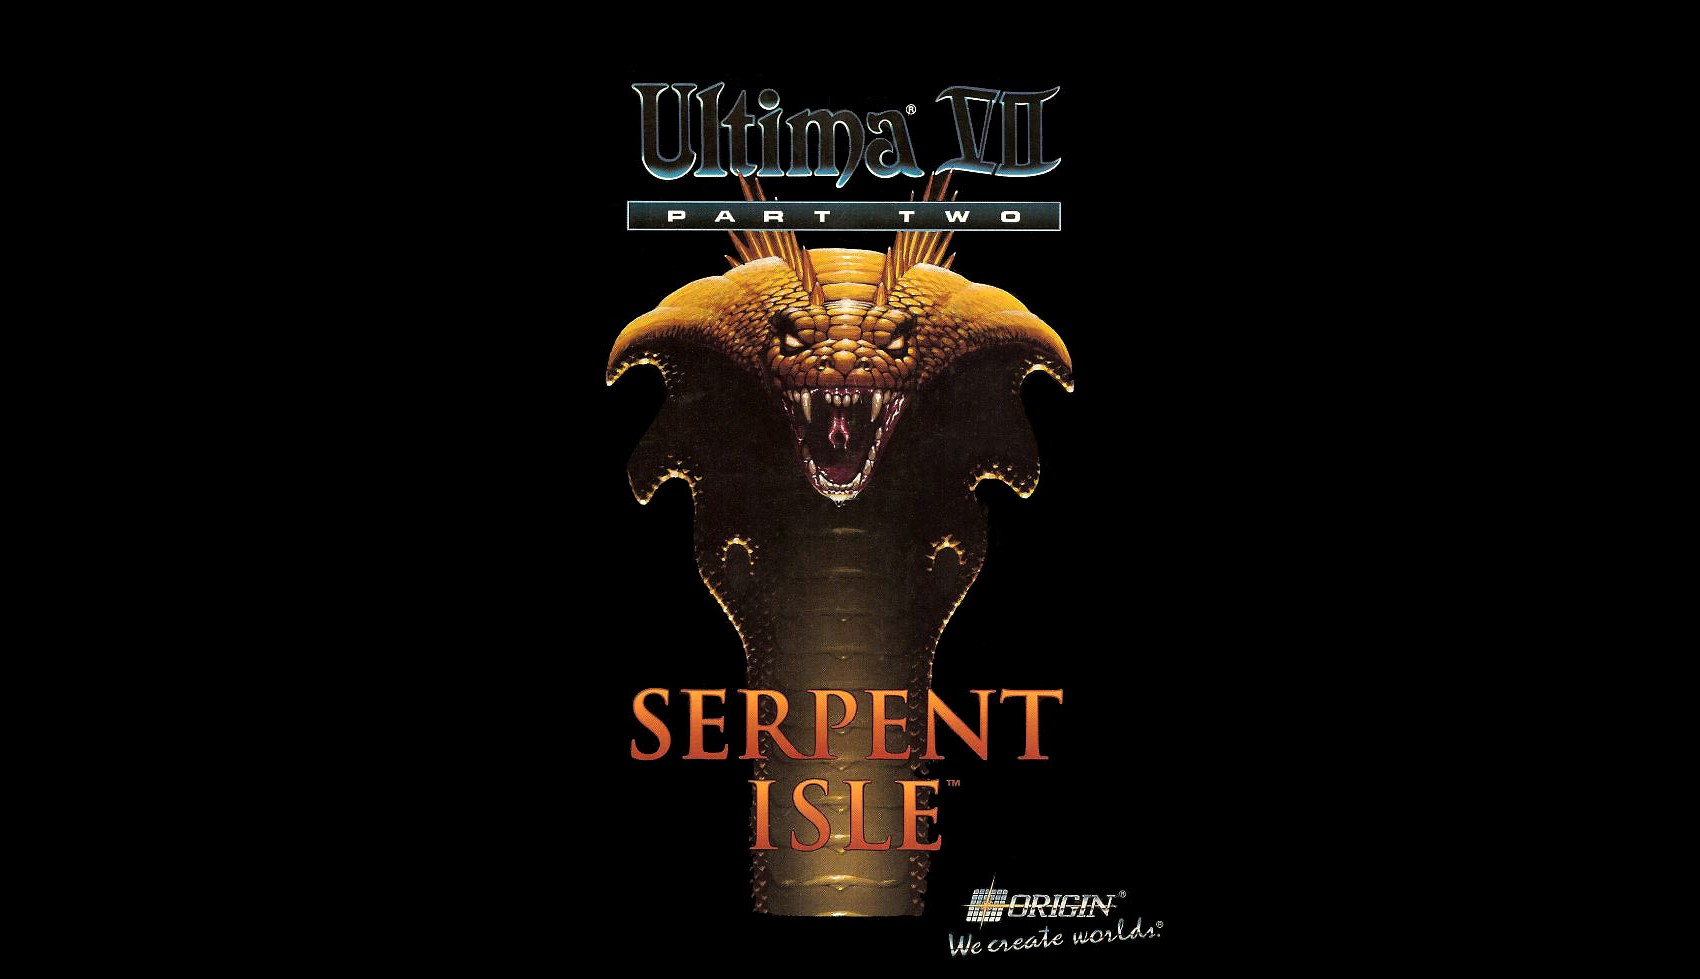 Serpent Isle is 20 years old!